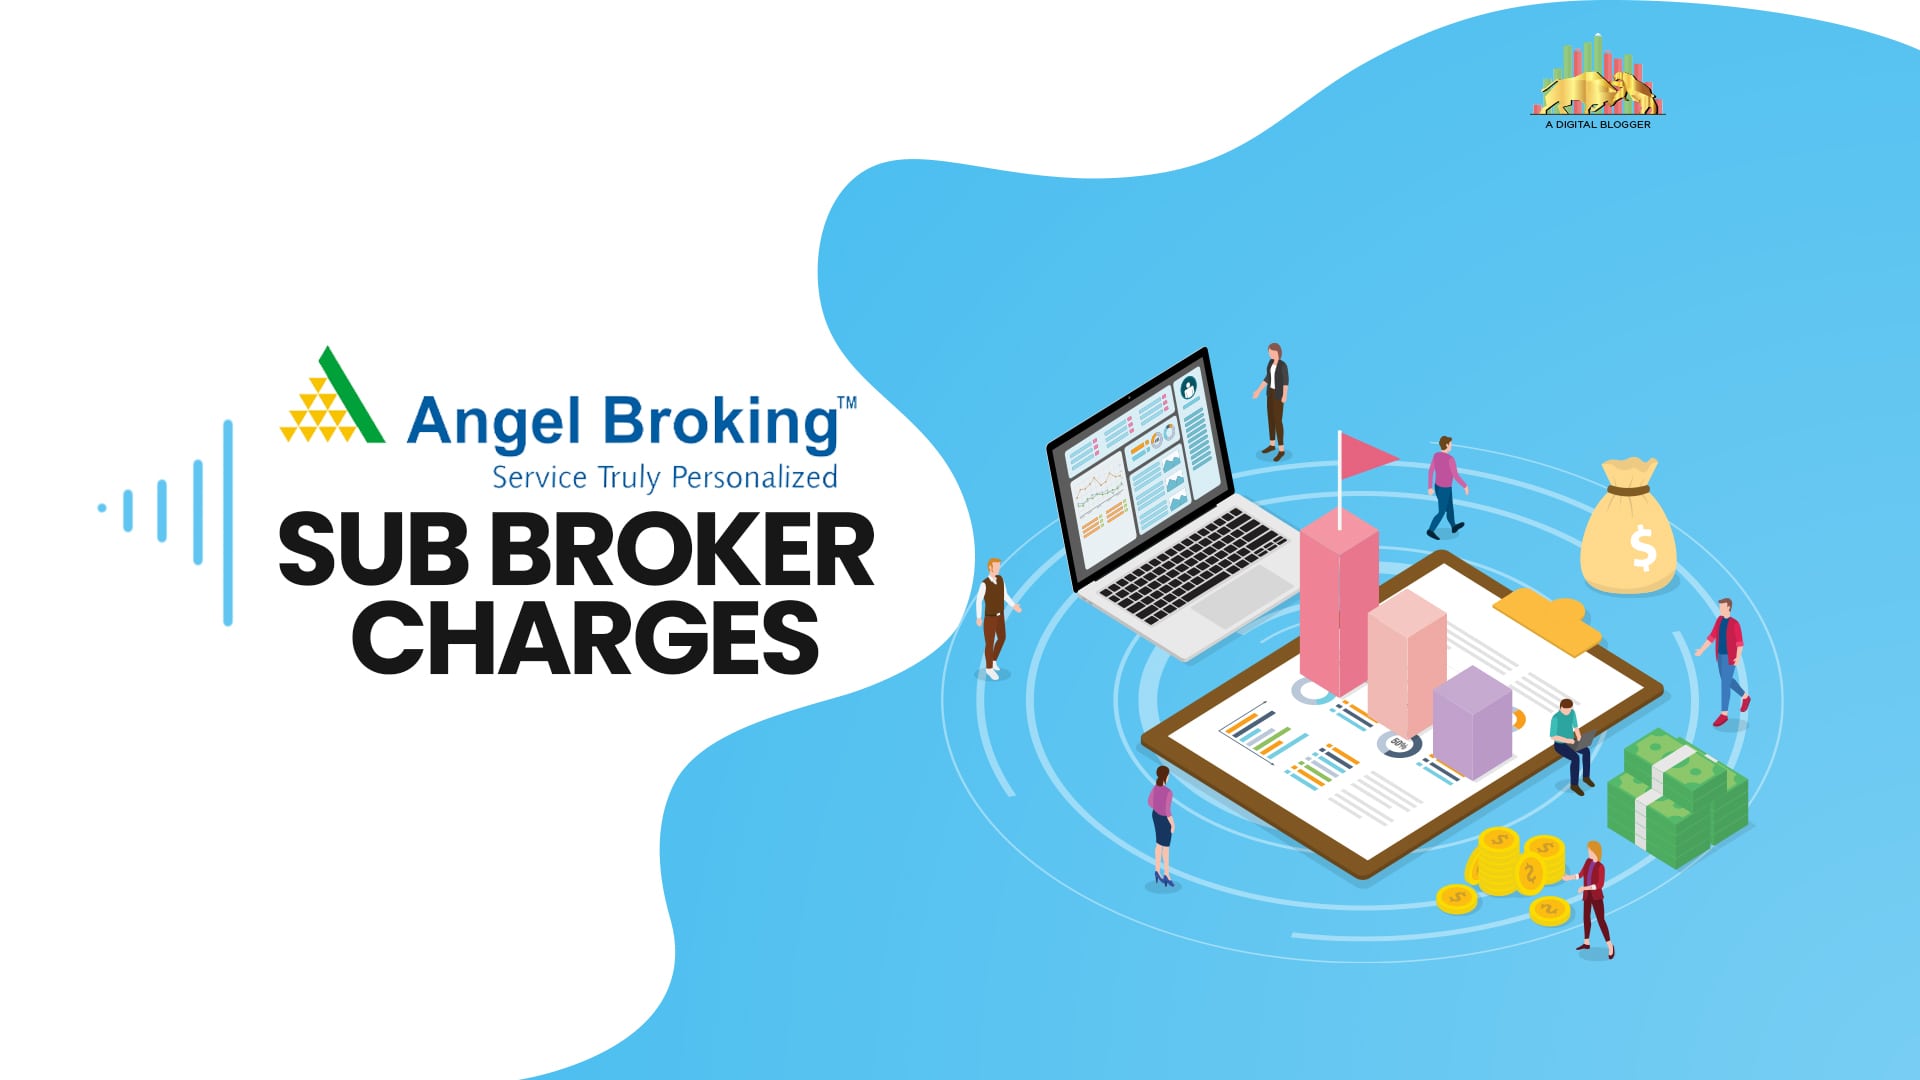 List of Angel Broking Sub Broker Charges